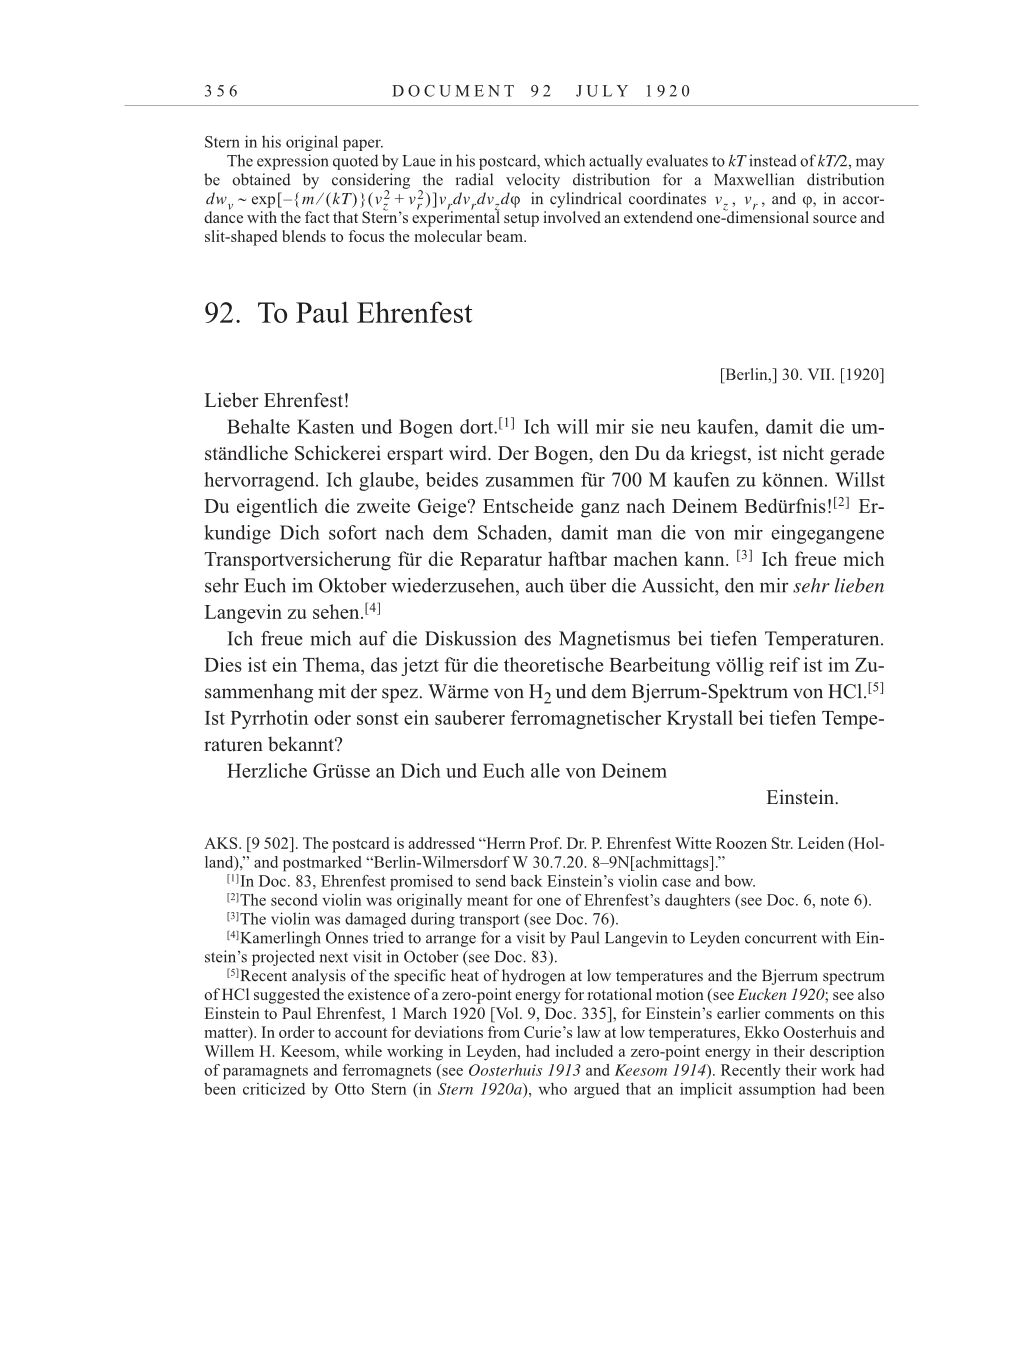 Volume 10: The Berlin Years: Correspondence May-December 1920 / Supplementary Correspondence 1909-1920 page 356